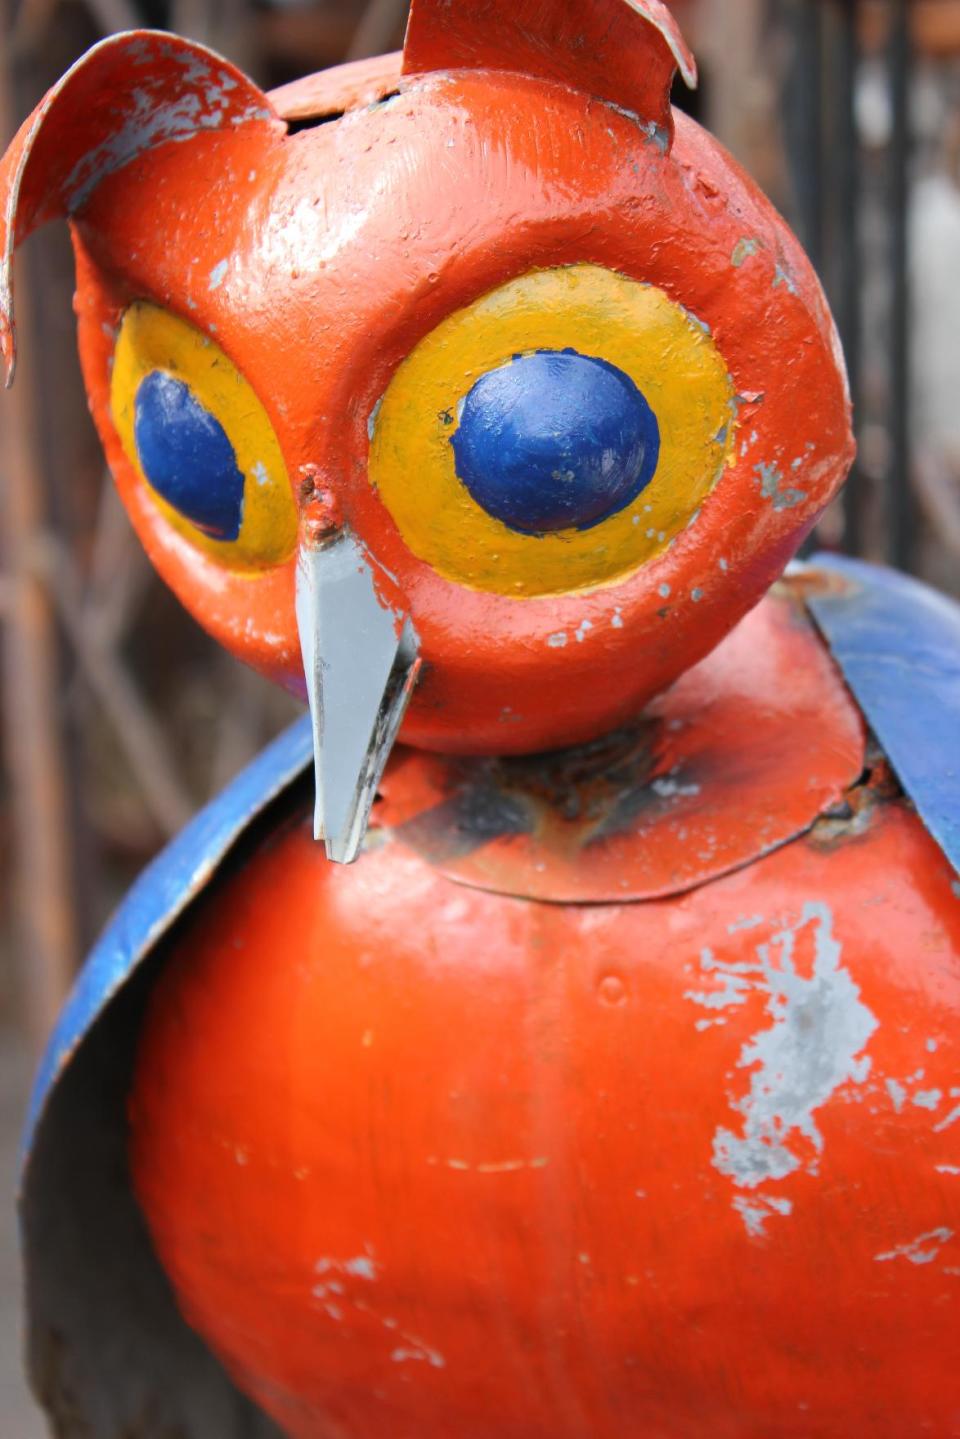 In this Saturday, May 19, 2012 photo, a whimsical owl sculpture is diplayed at Home & Garden Art in Seattle. The sculpture is made in the Southern U.S. from recycled oil drums, primarily salvaged in Texas. (AP Photo/Cedar Burnett)